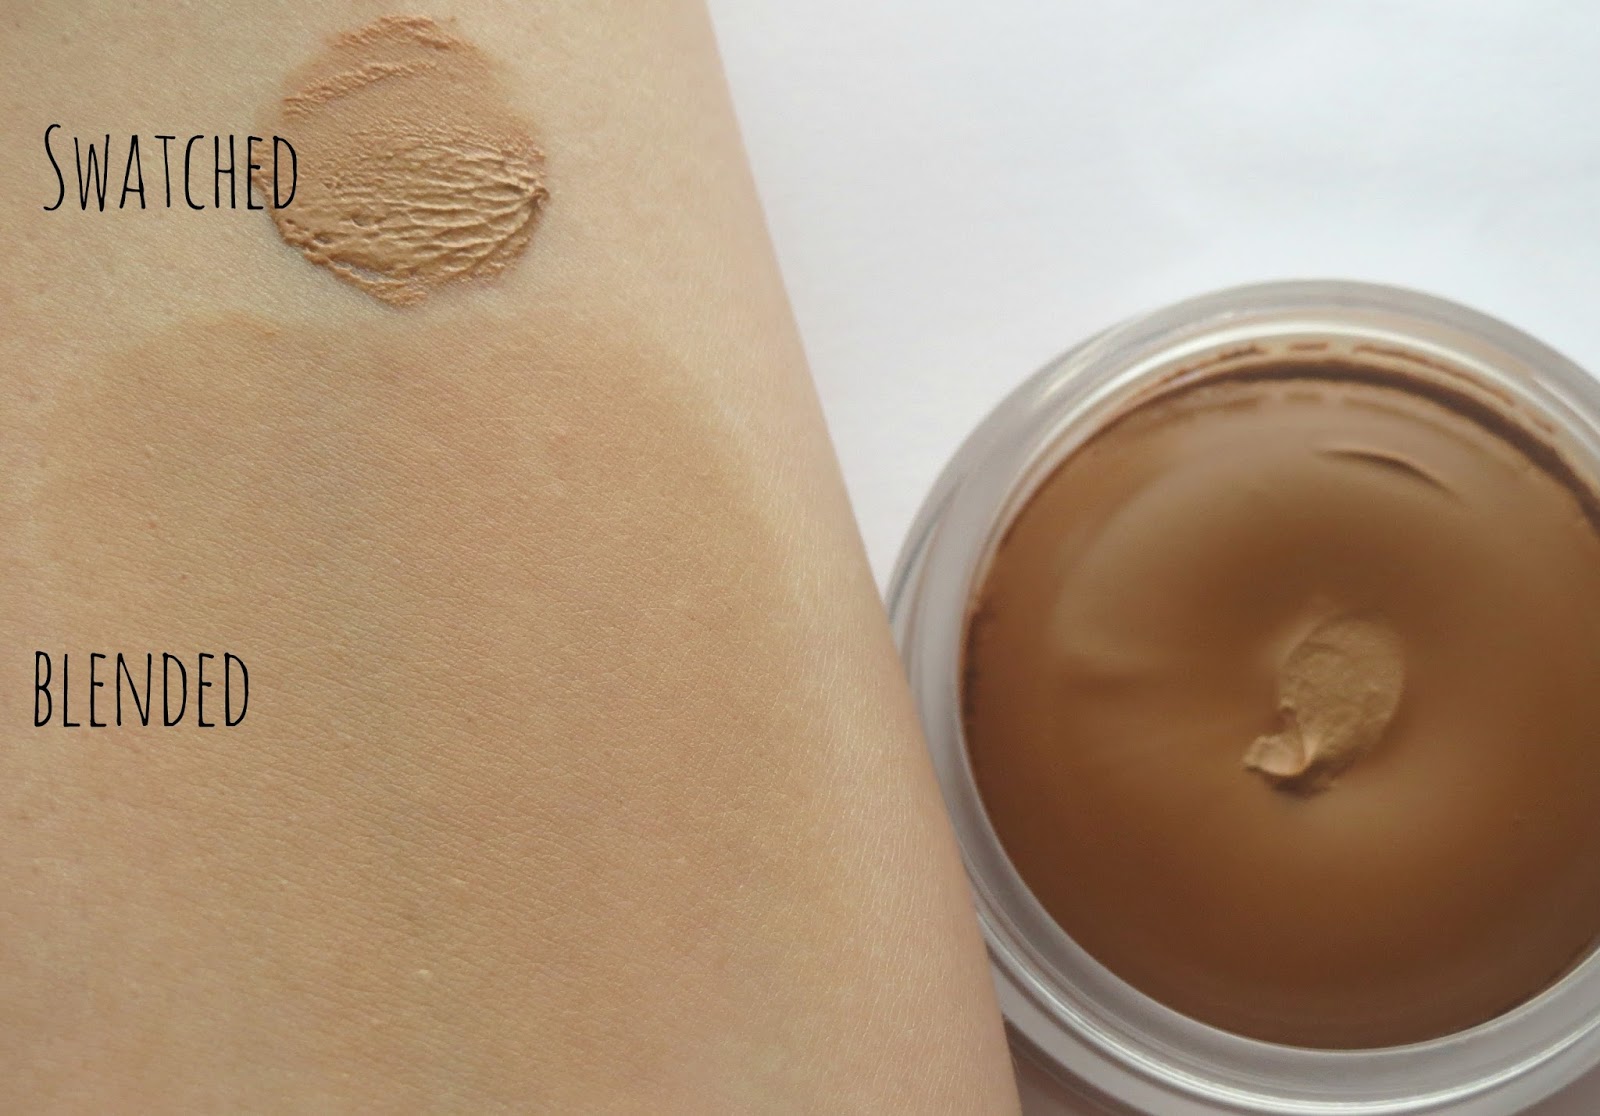 Rodet Lille bitte Kostume Bourjois Bronzing Primer - Review - Beauty and the Chic